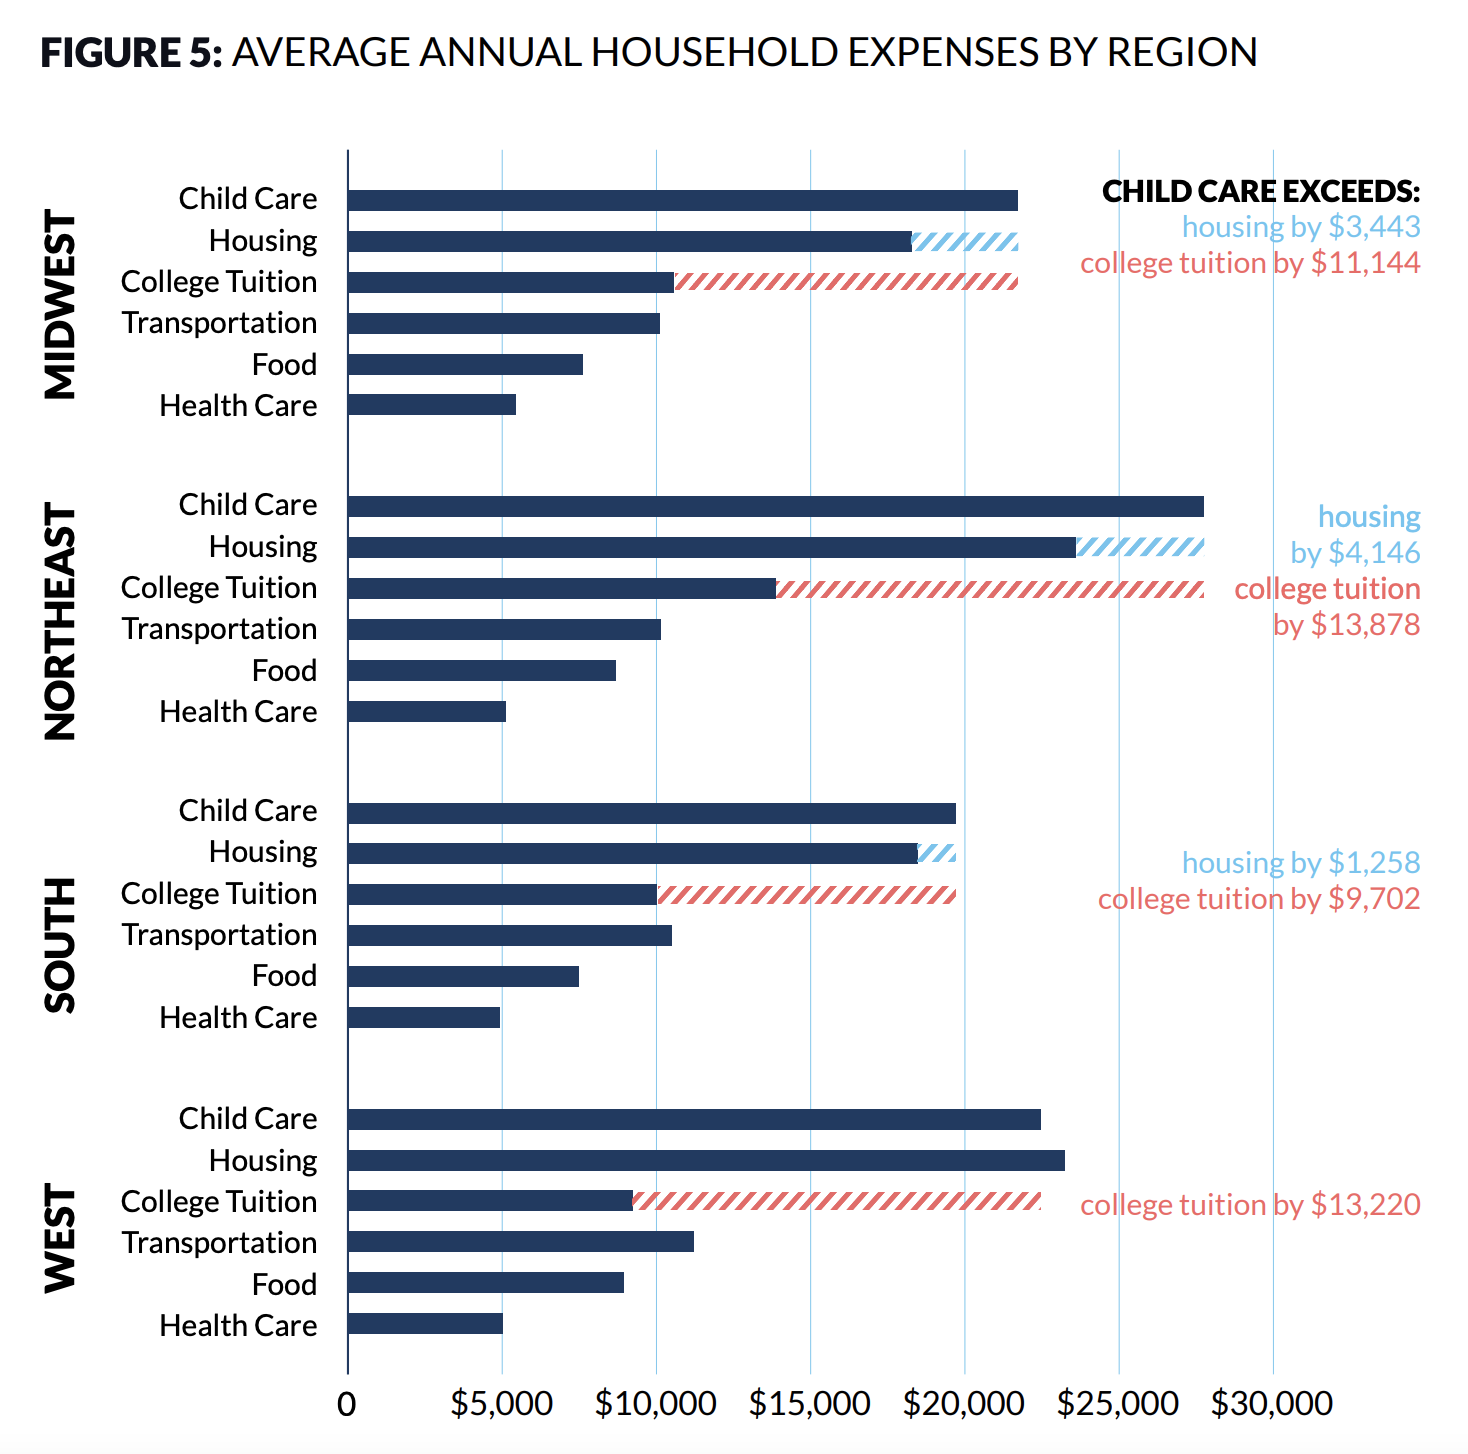 Bar chart comparing average annual household expenses in the U.S by region. 